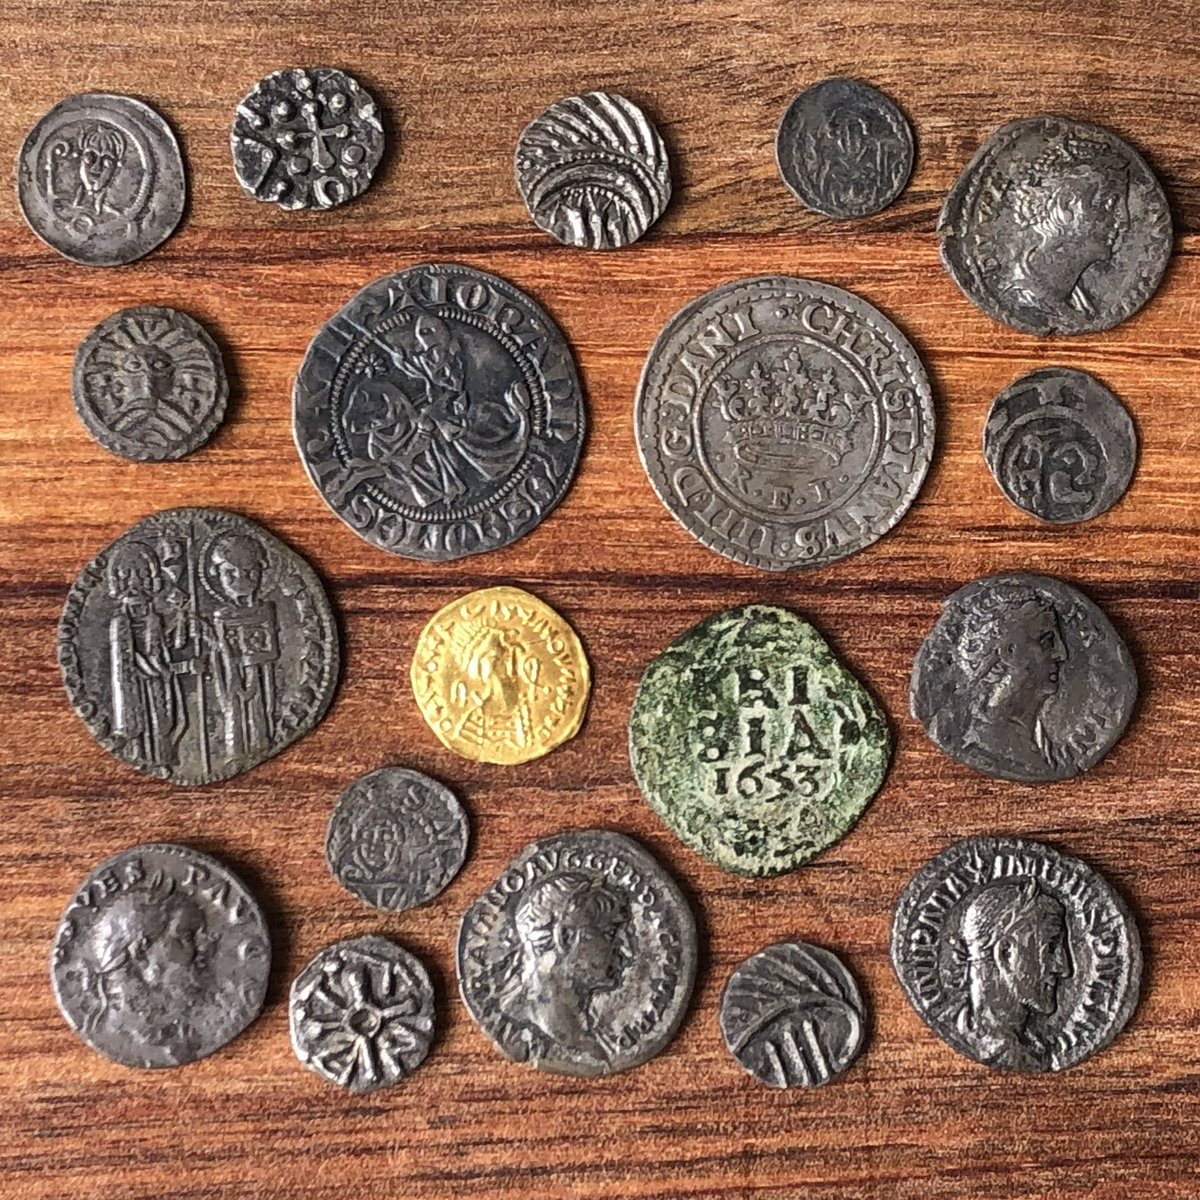 Just a cool picture of some of the best coins I’ve found metaldetecting! 😎👍🍀 #metaldetecting